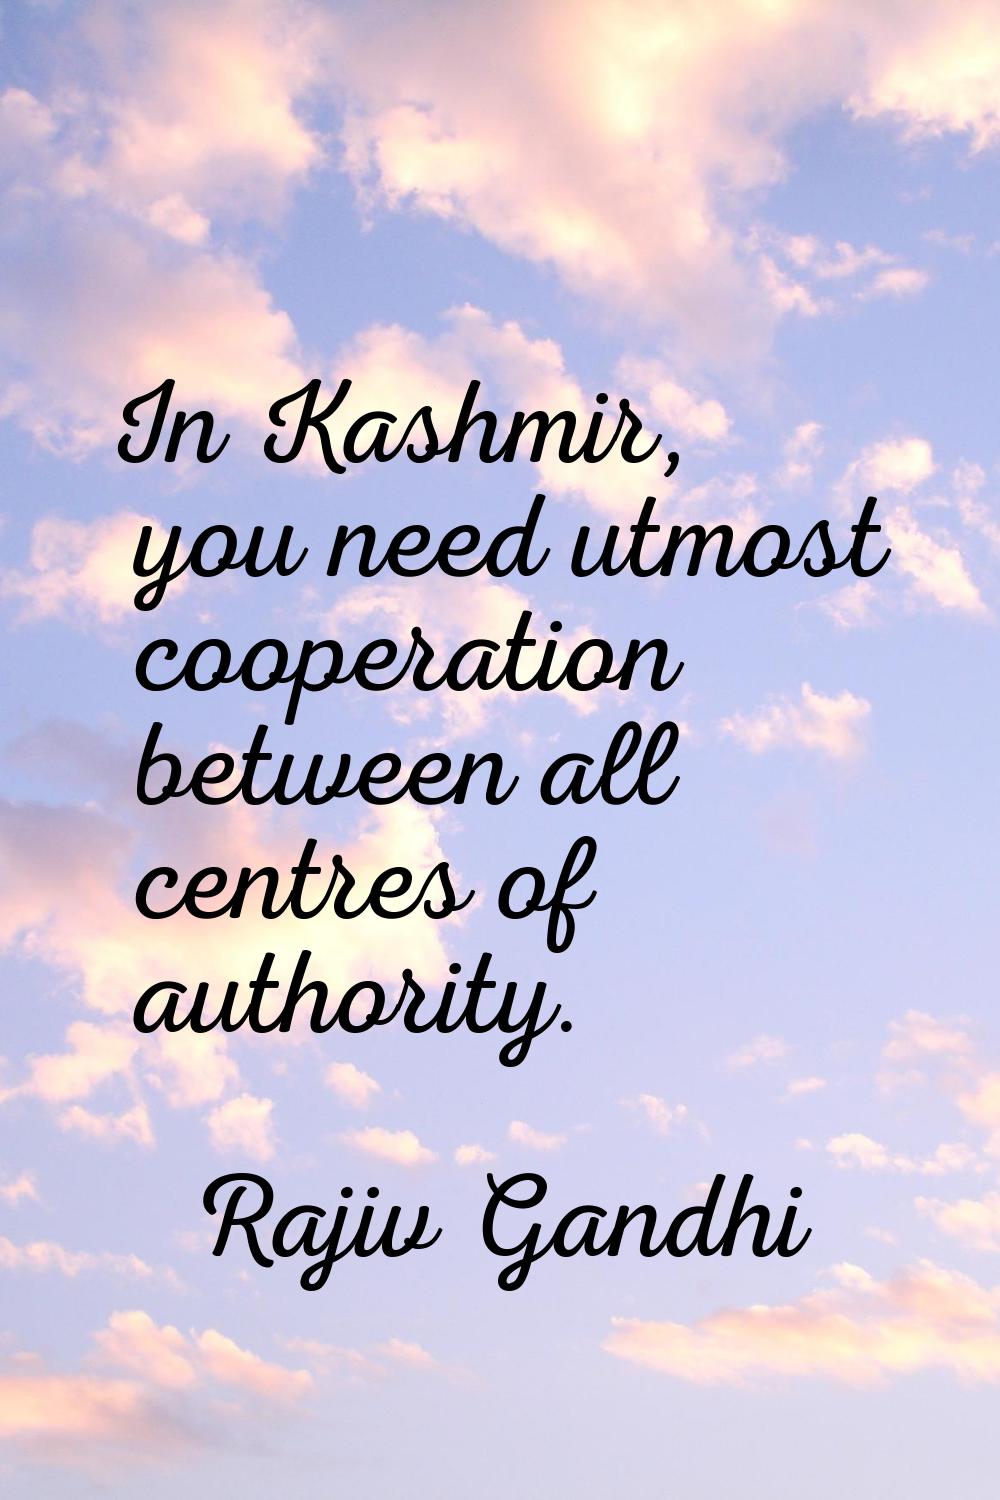 In Kashmir, you need utmost cooperation between all centres of authority.